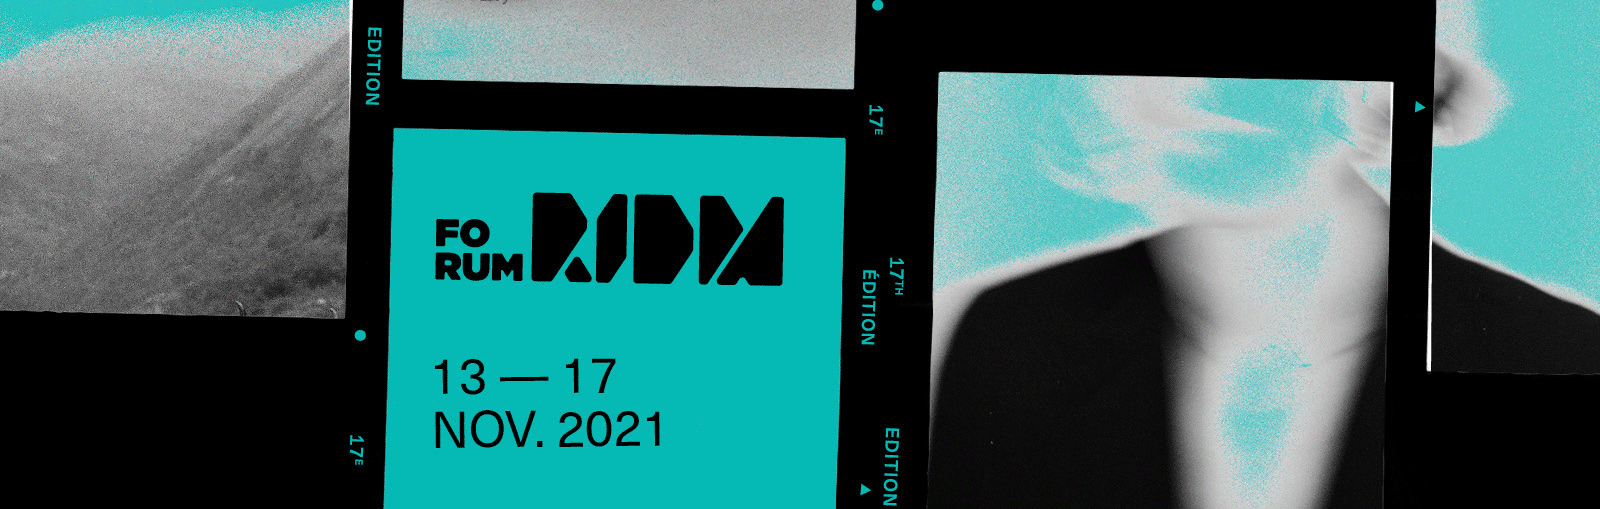 MISSION ACCOMPLISHED FOR THE 2021 EDITION OF FORUM RIDM!